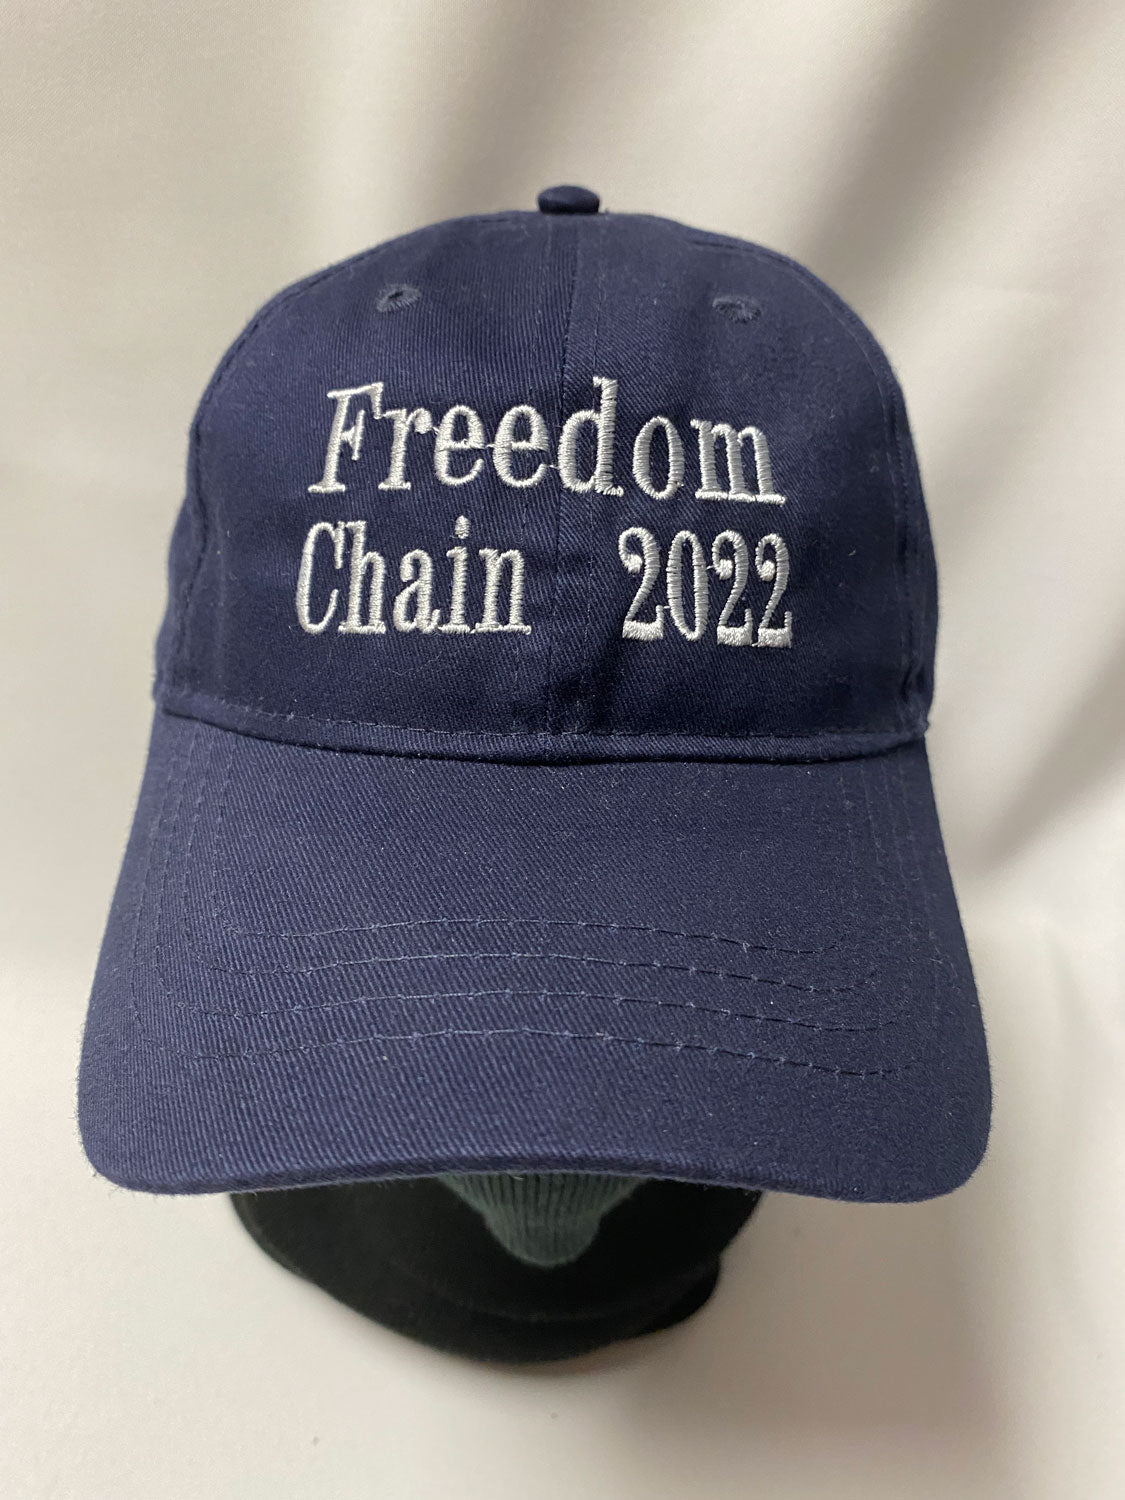 BALL CAP FREEDOM CHAIN 2022 - white embroidery on navy